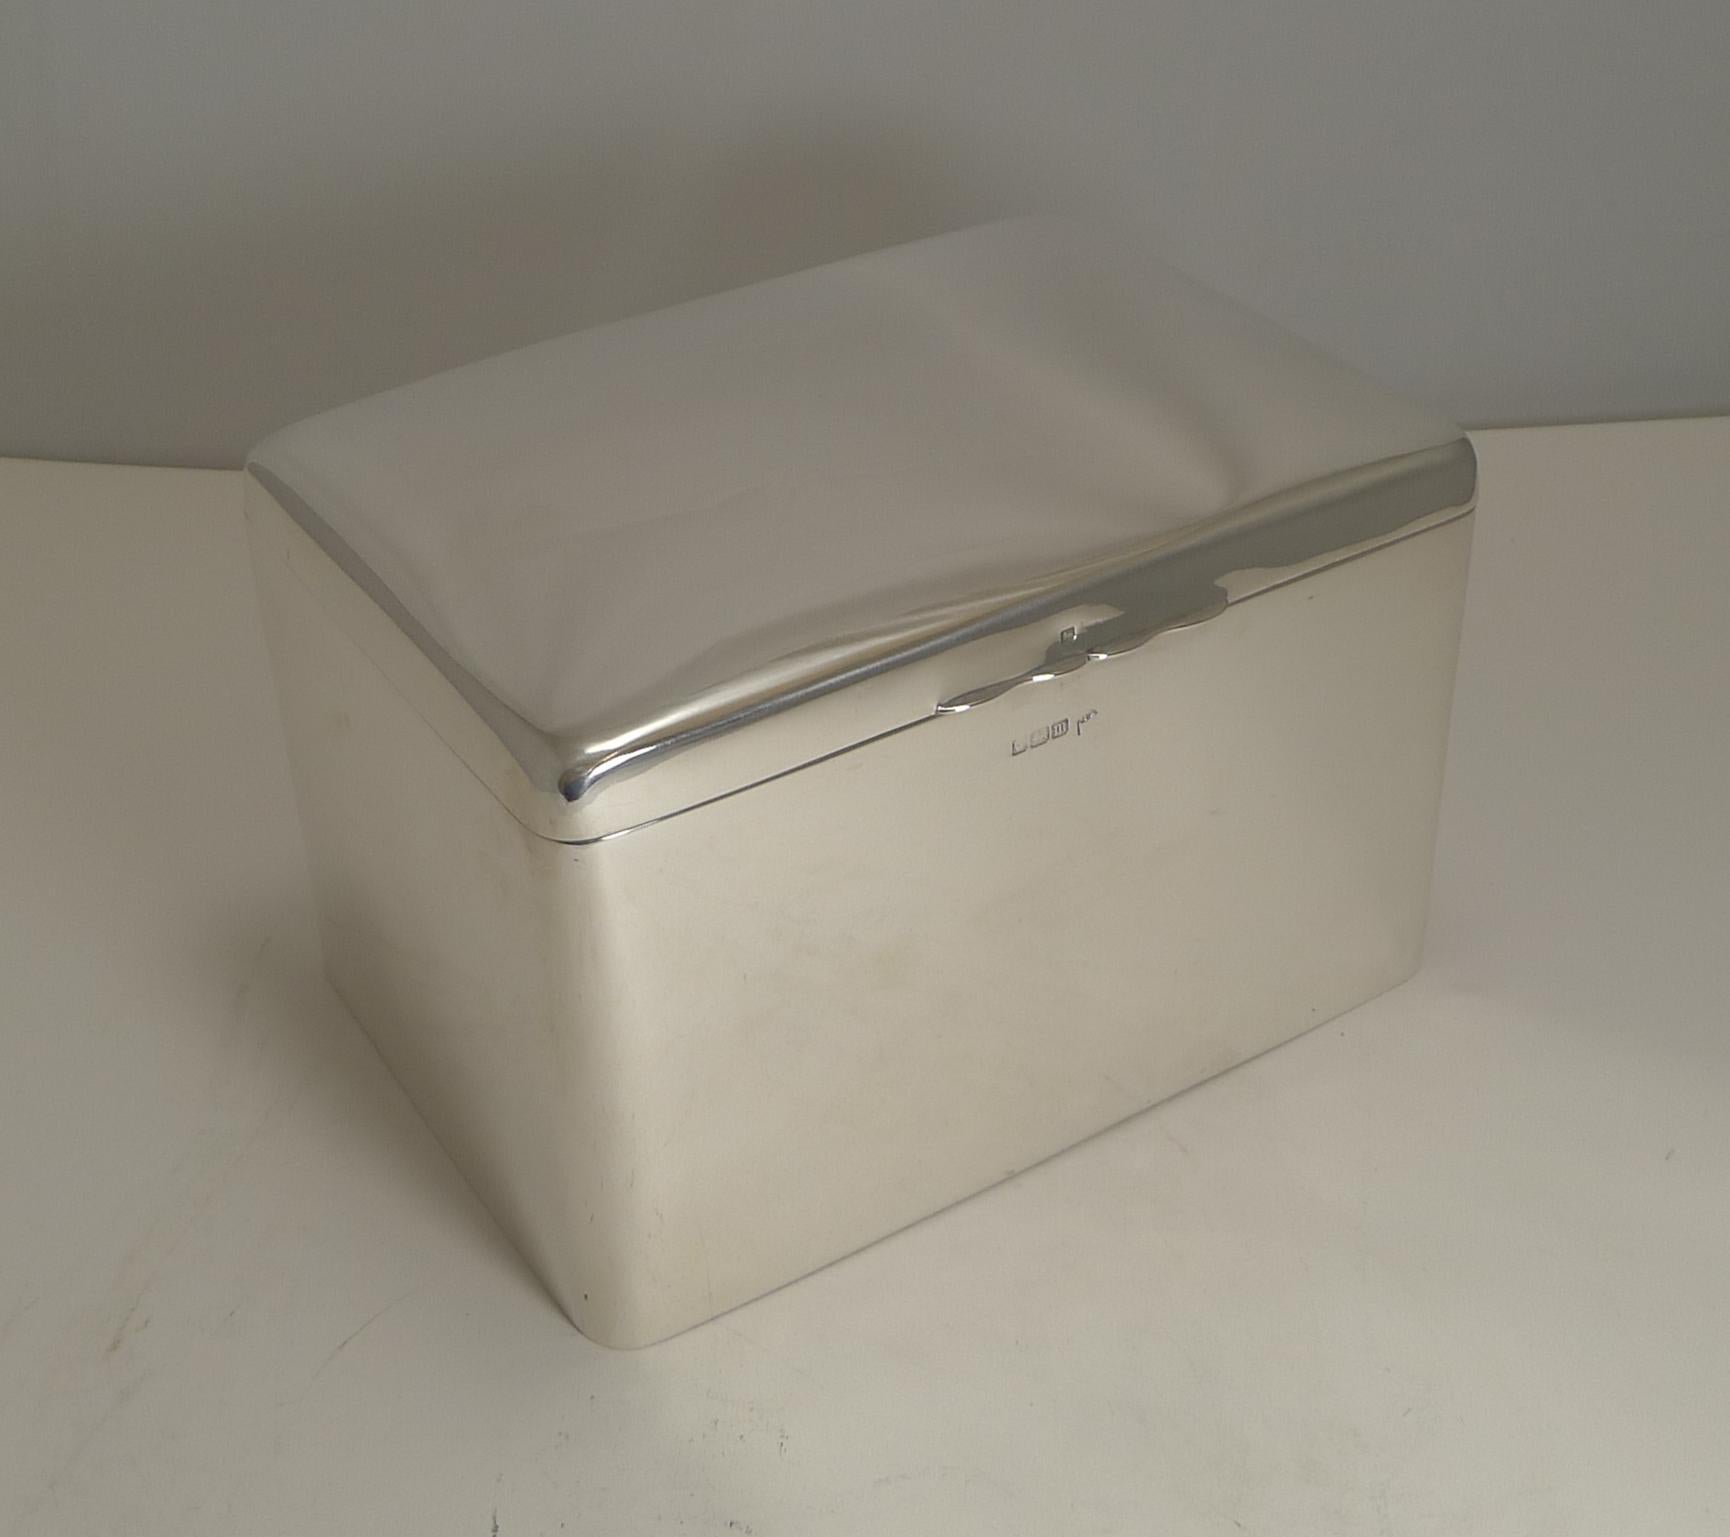 A stunning and unusual large cigar box / Humidor made from sterling silver by the top-notch silversmith, Walker and Hall.

A fabulous simple Art Deco design with a pillow top, the hinged lid lifts to reveal the underside of the lid lavishly